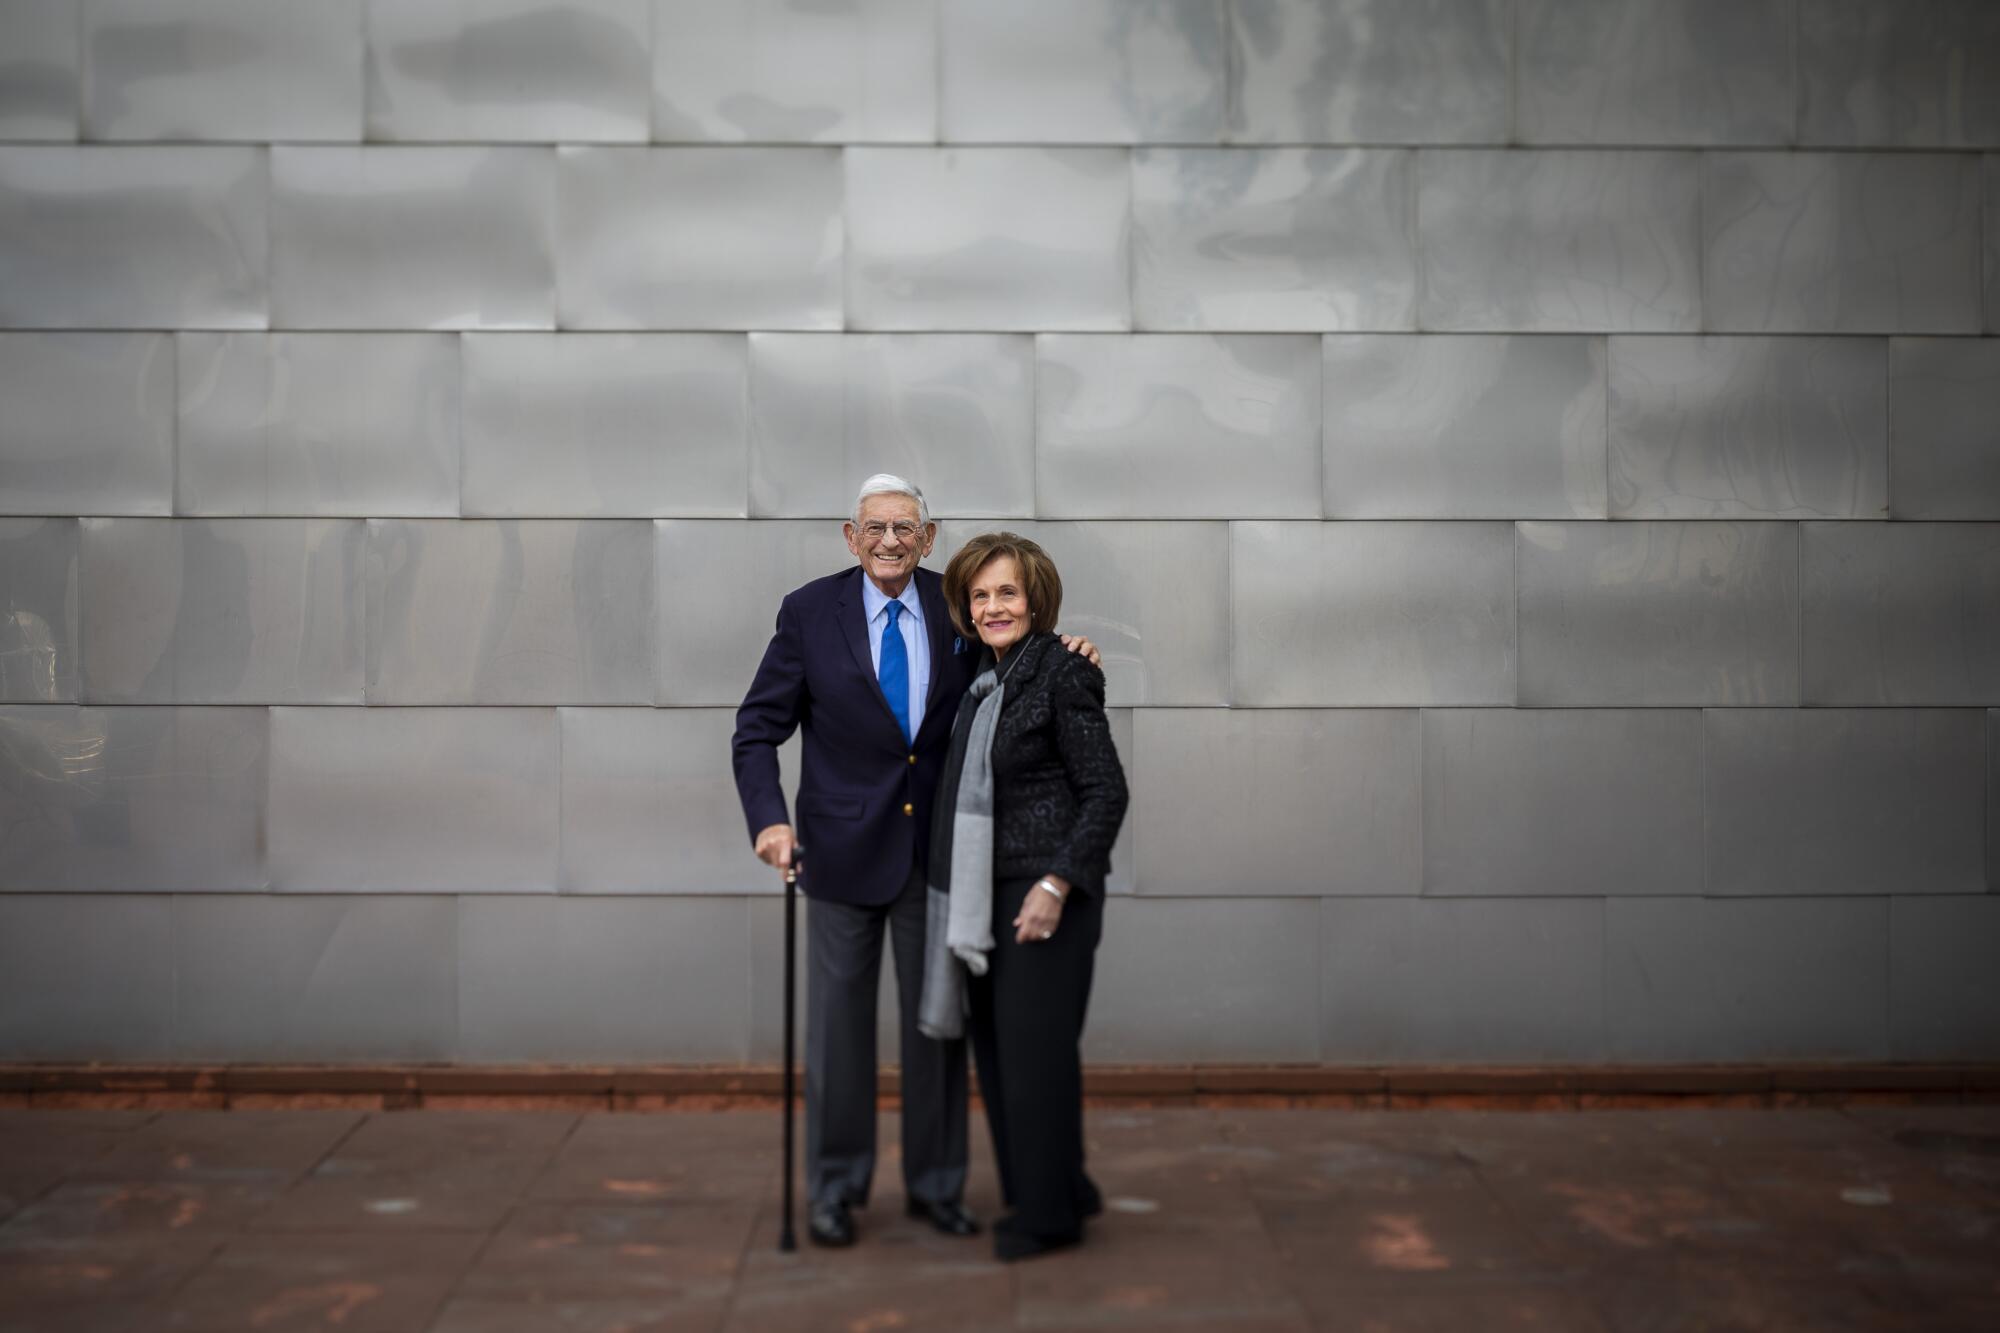 Eli Broad, leaning on a cane, puts an arm around wife Edythe as they stand in front of a wall of gray metal panels.